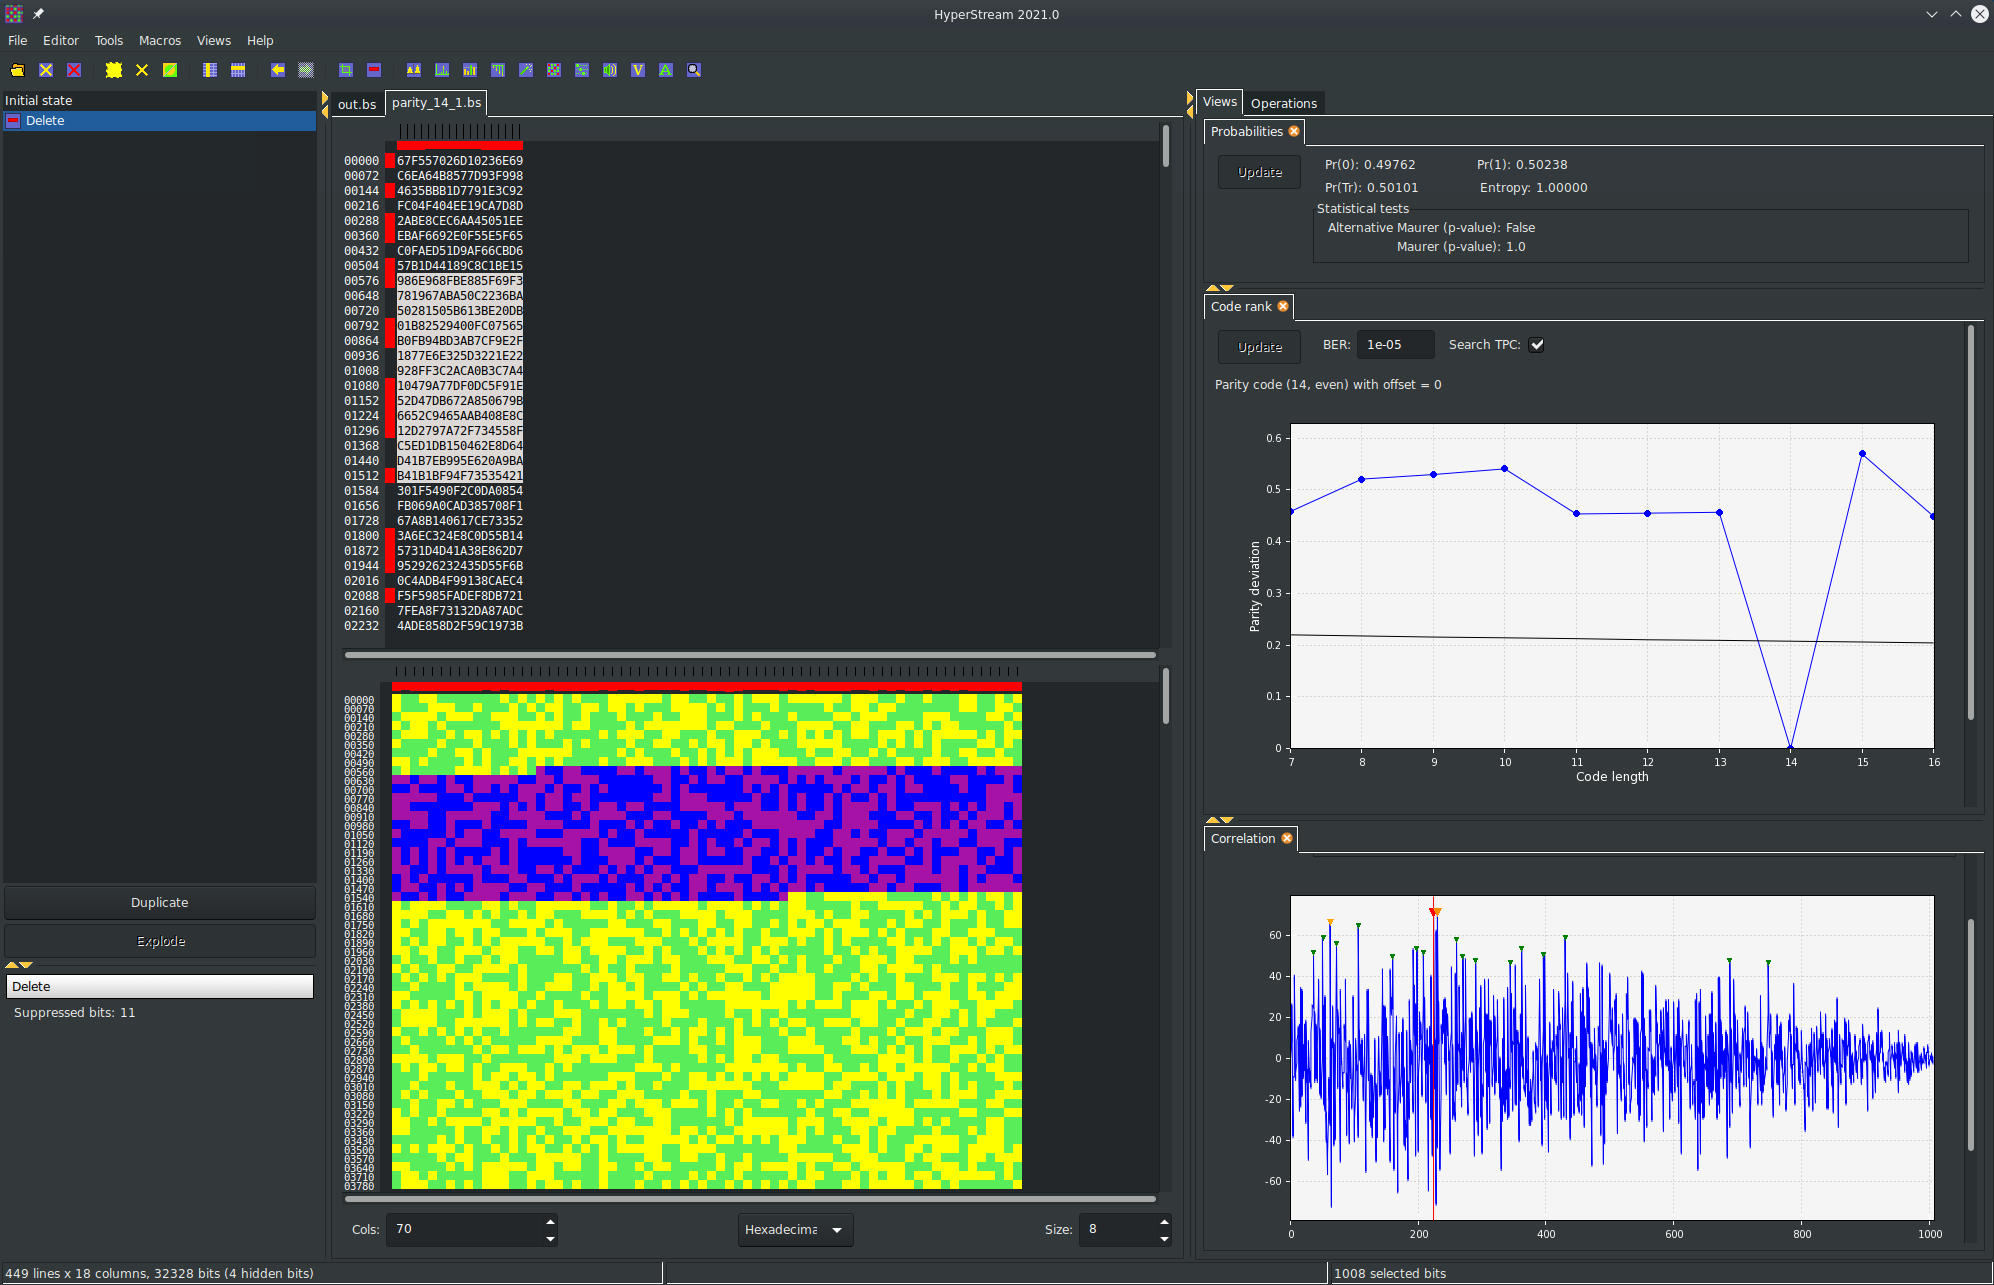 Dual view editor - HyperStream is able to load many bit streams in the same session. For each bit stream, the dual view bit+hexa can be selected, with synchronous selection between views. This screenshot also illustrate the bit autocorrelation view and the detection of a (14, 13, even) parity code.